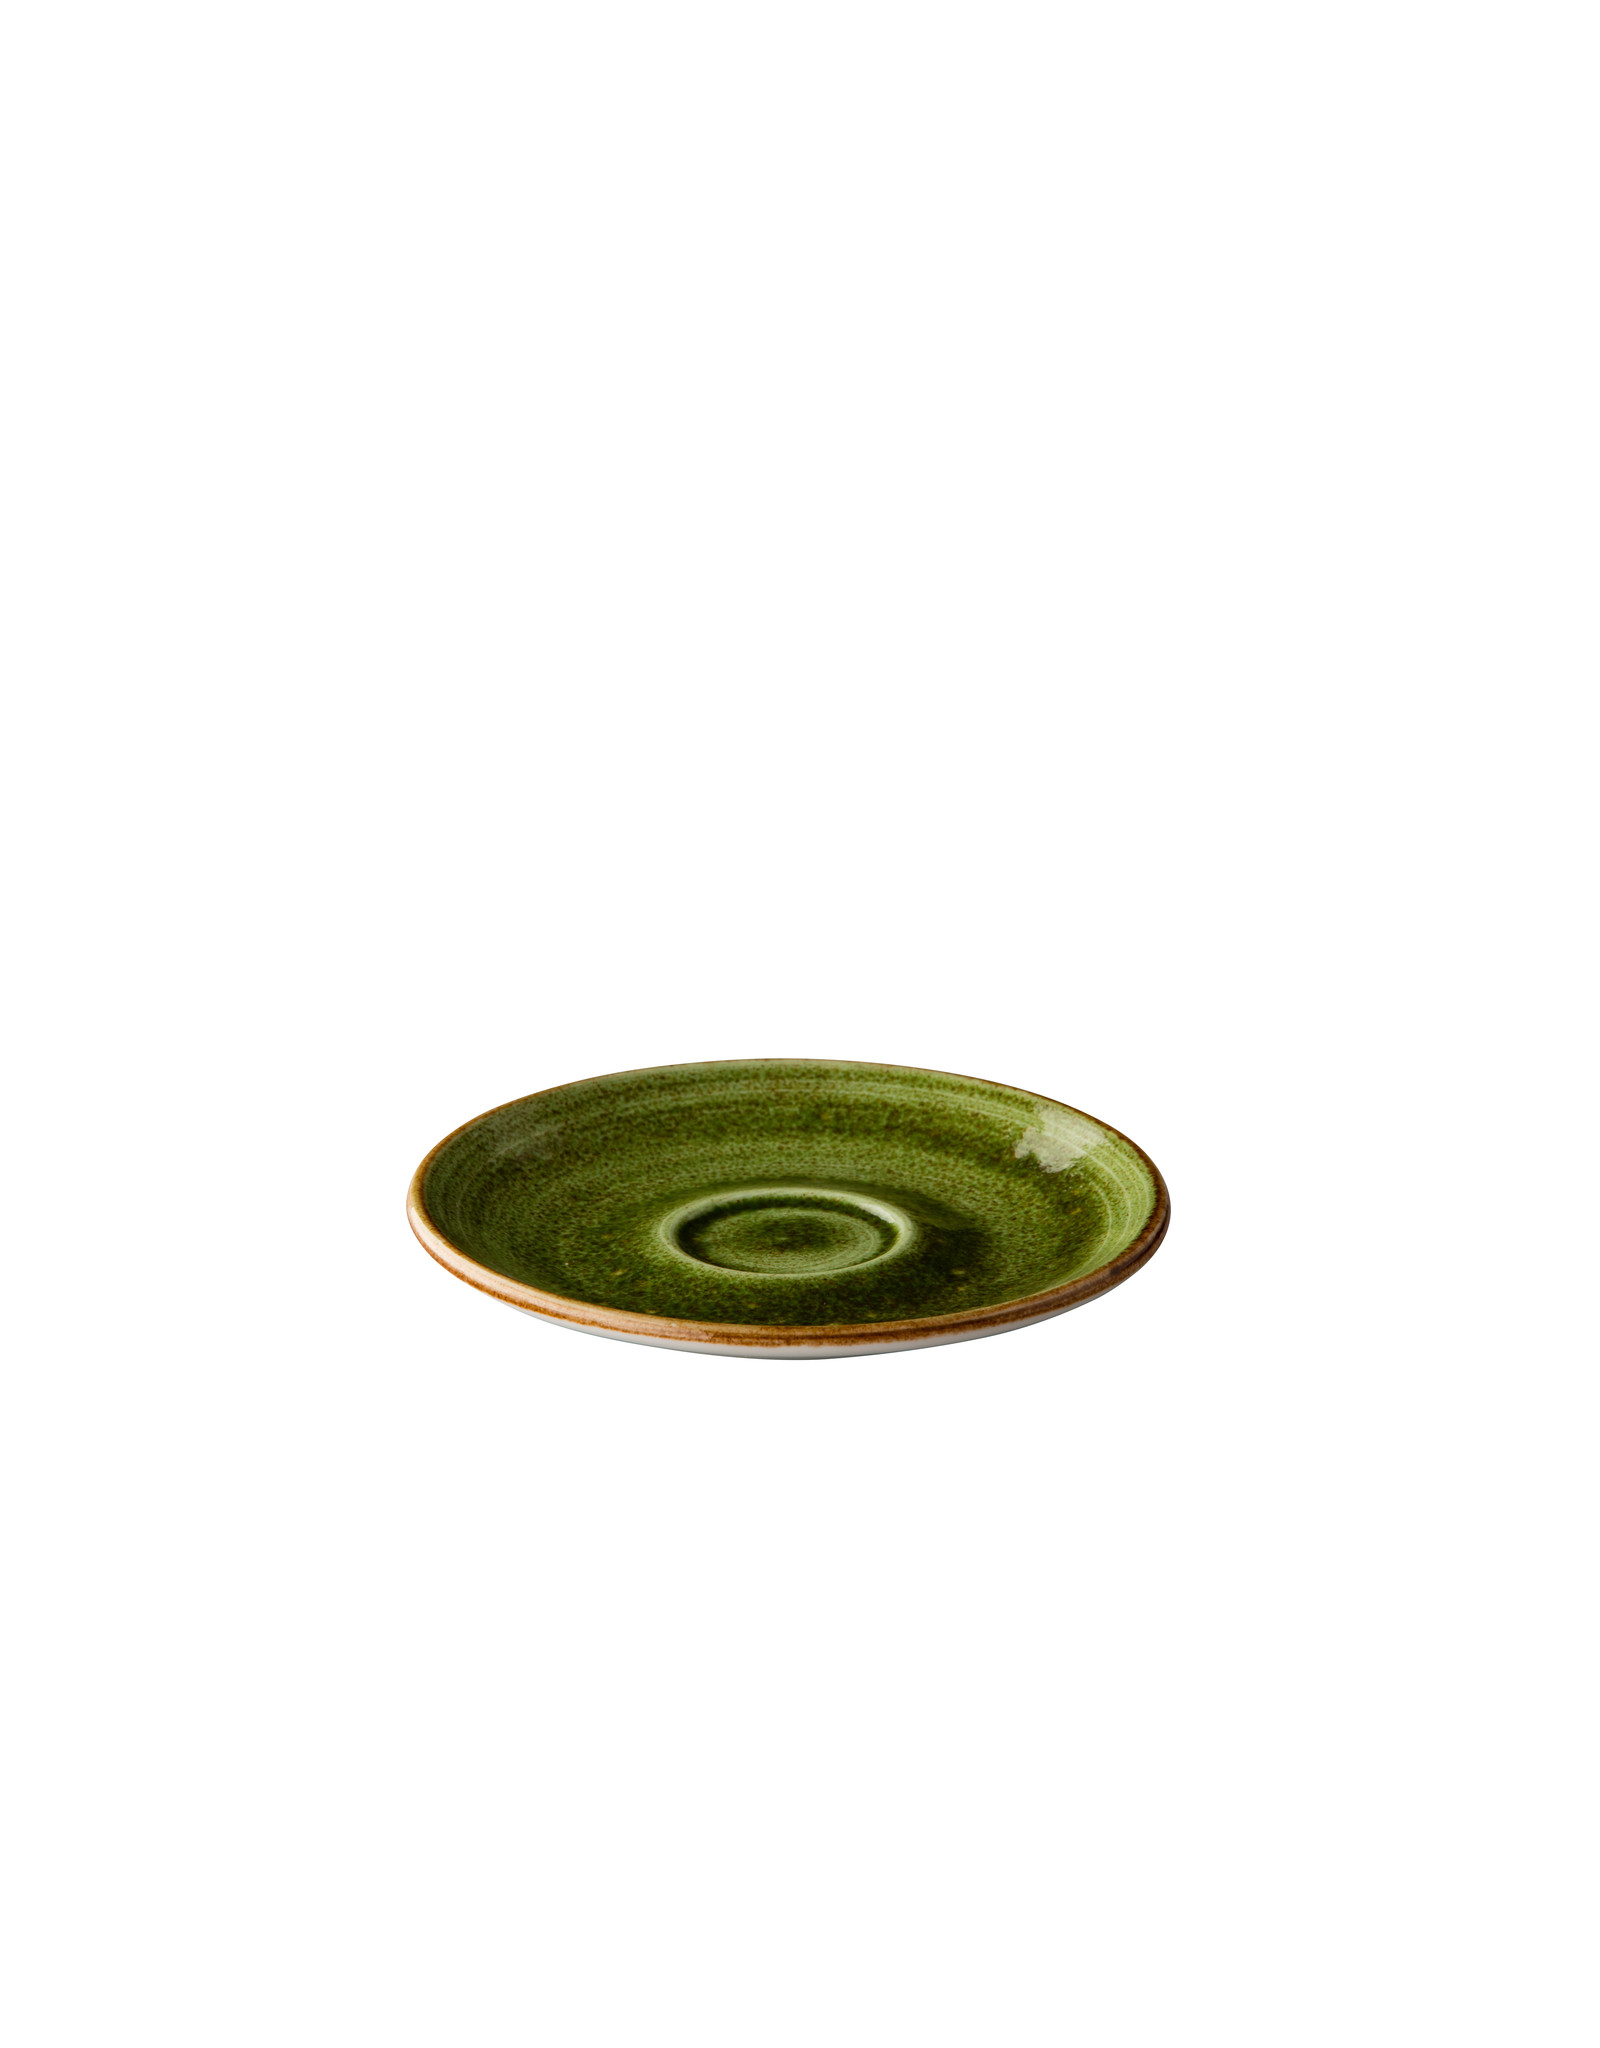 Stylepoint Jersey espresso saucer stackable green 13 cm